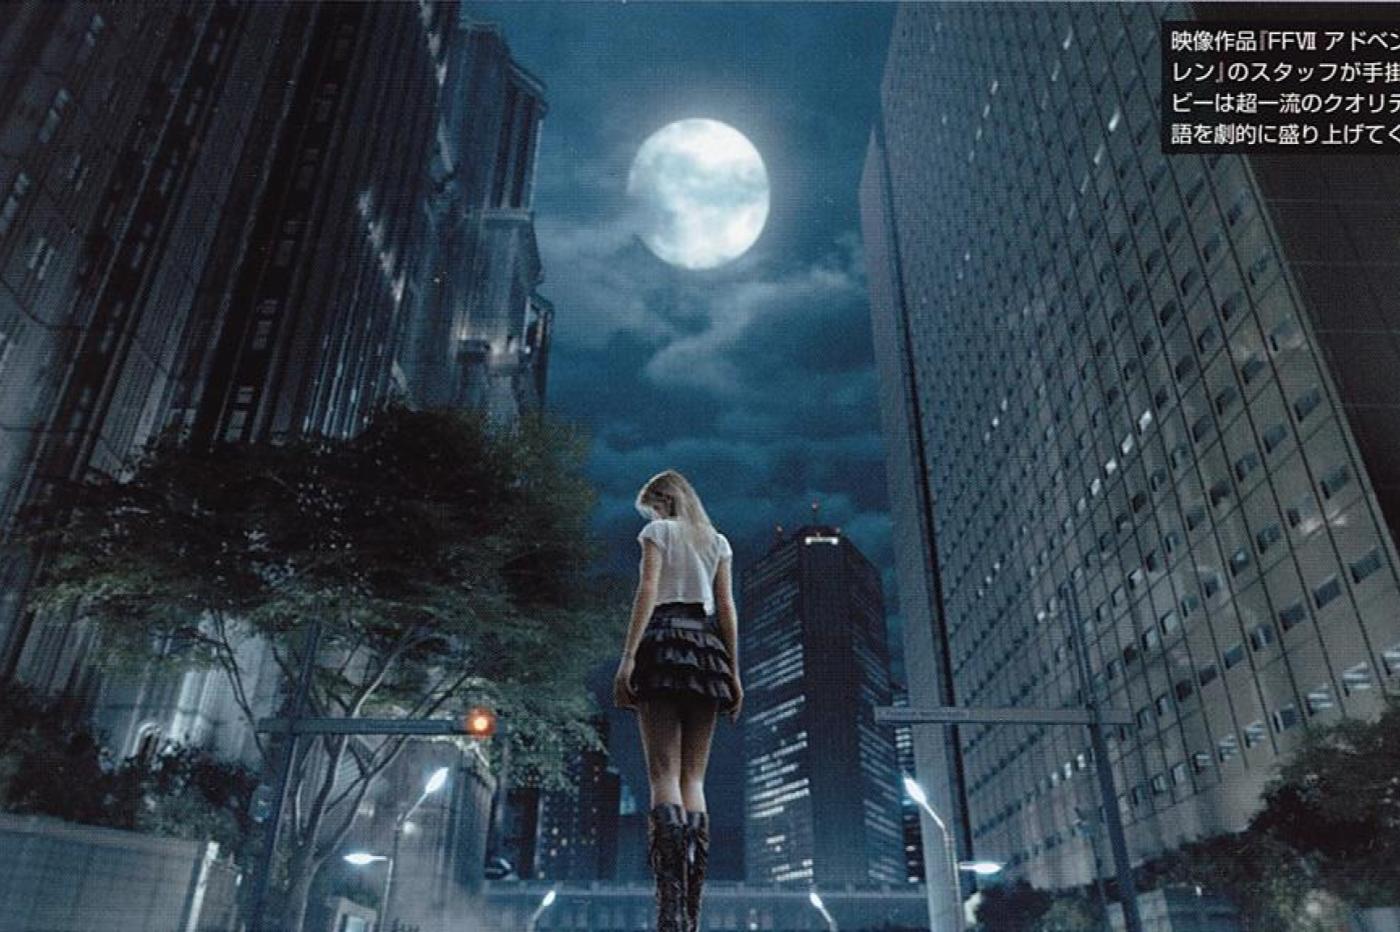 Female character from Final Fantasy Versus XIII in the middle of a modern city at night